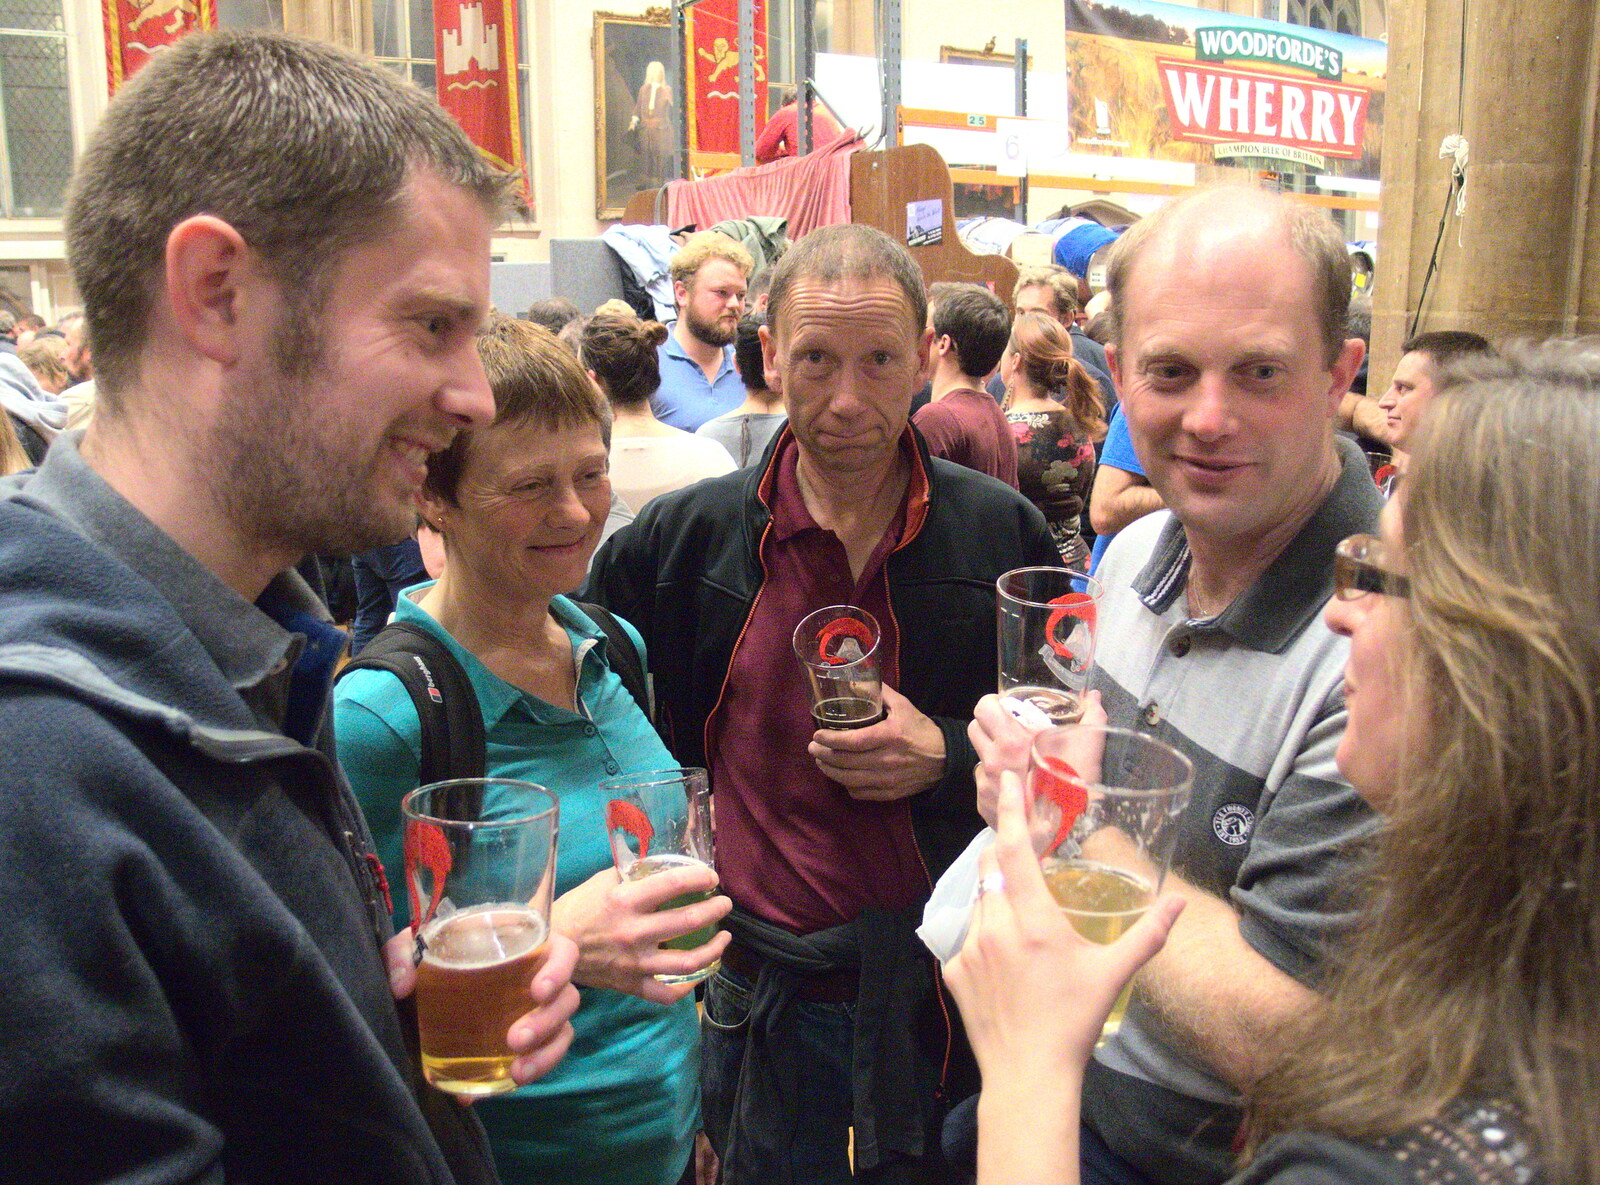 The Boy Phil, Pippa, Apple, Paul and Suey from The 38th Norwich Beer Festival, Norwich, Norfolk - 28th October 2015